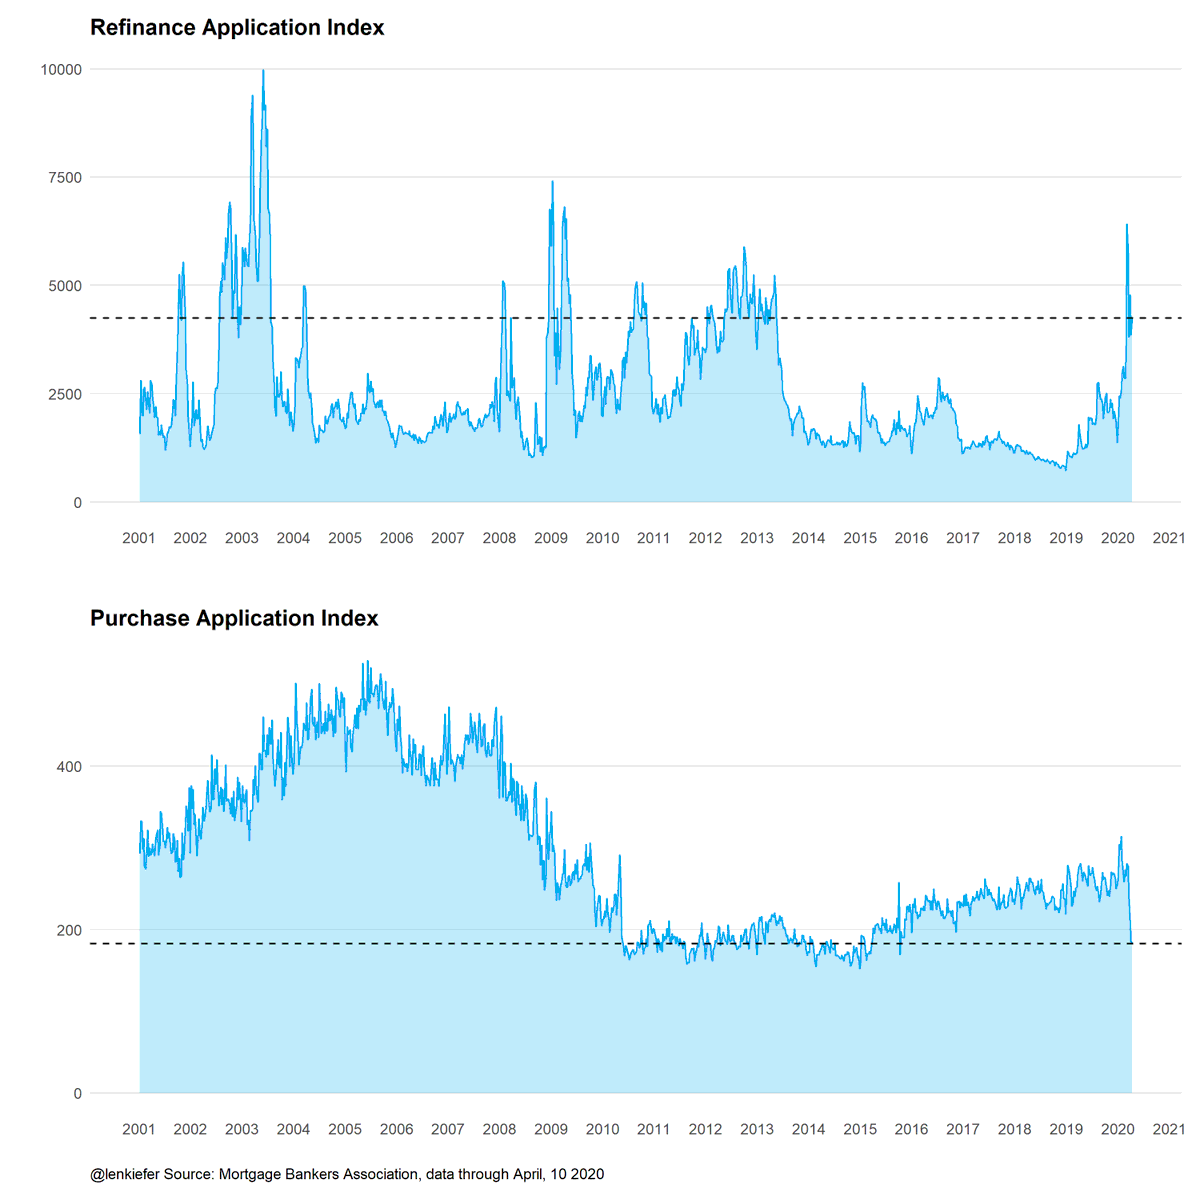 trends in the refinance and purchase application indexrefi has come down from earlier spike, but still running around 2012 levels (a big year for refi)purchase applications are running around 2015 levels, temporarily (I hope) erasing 5 years of recovery